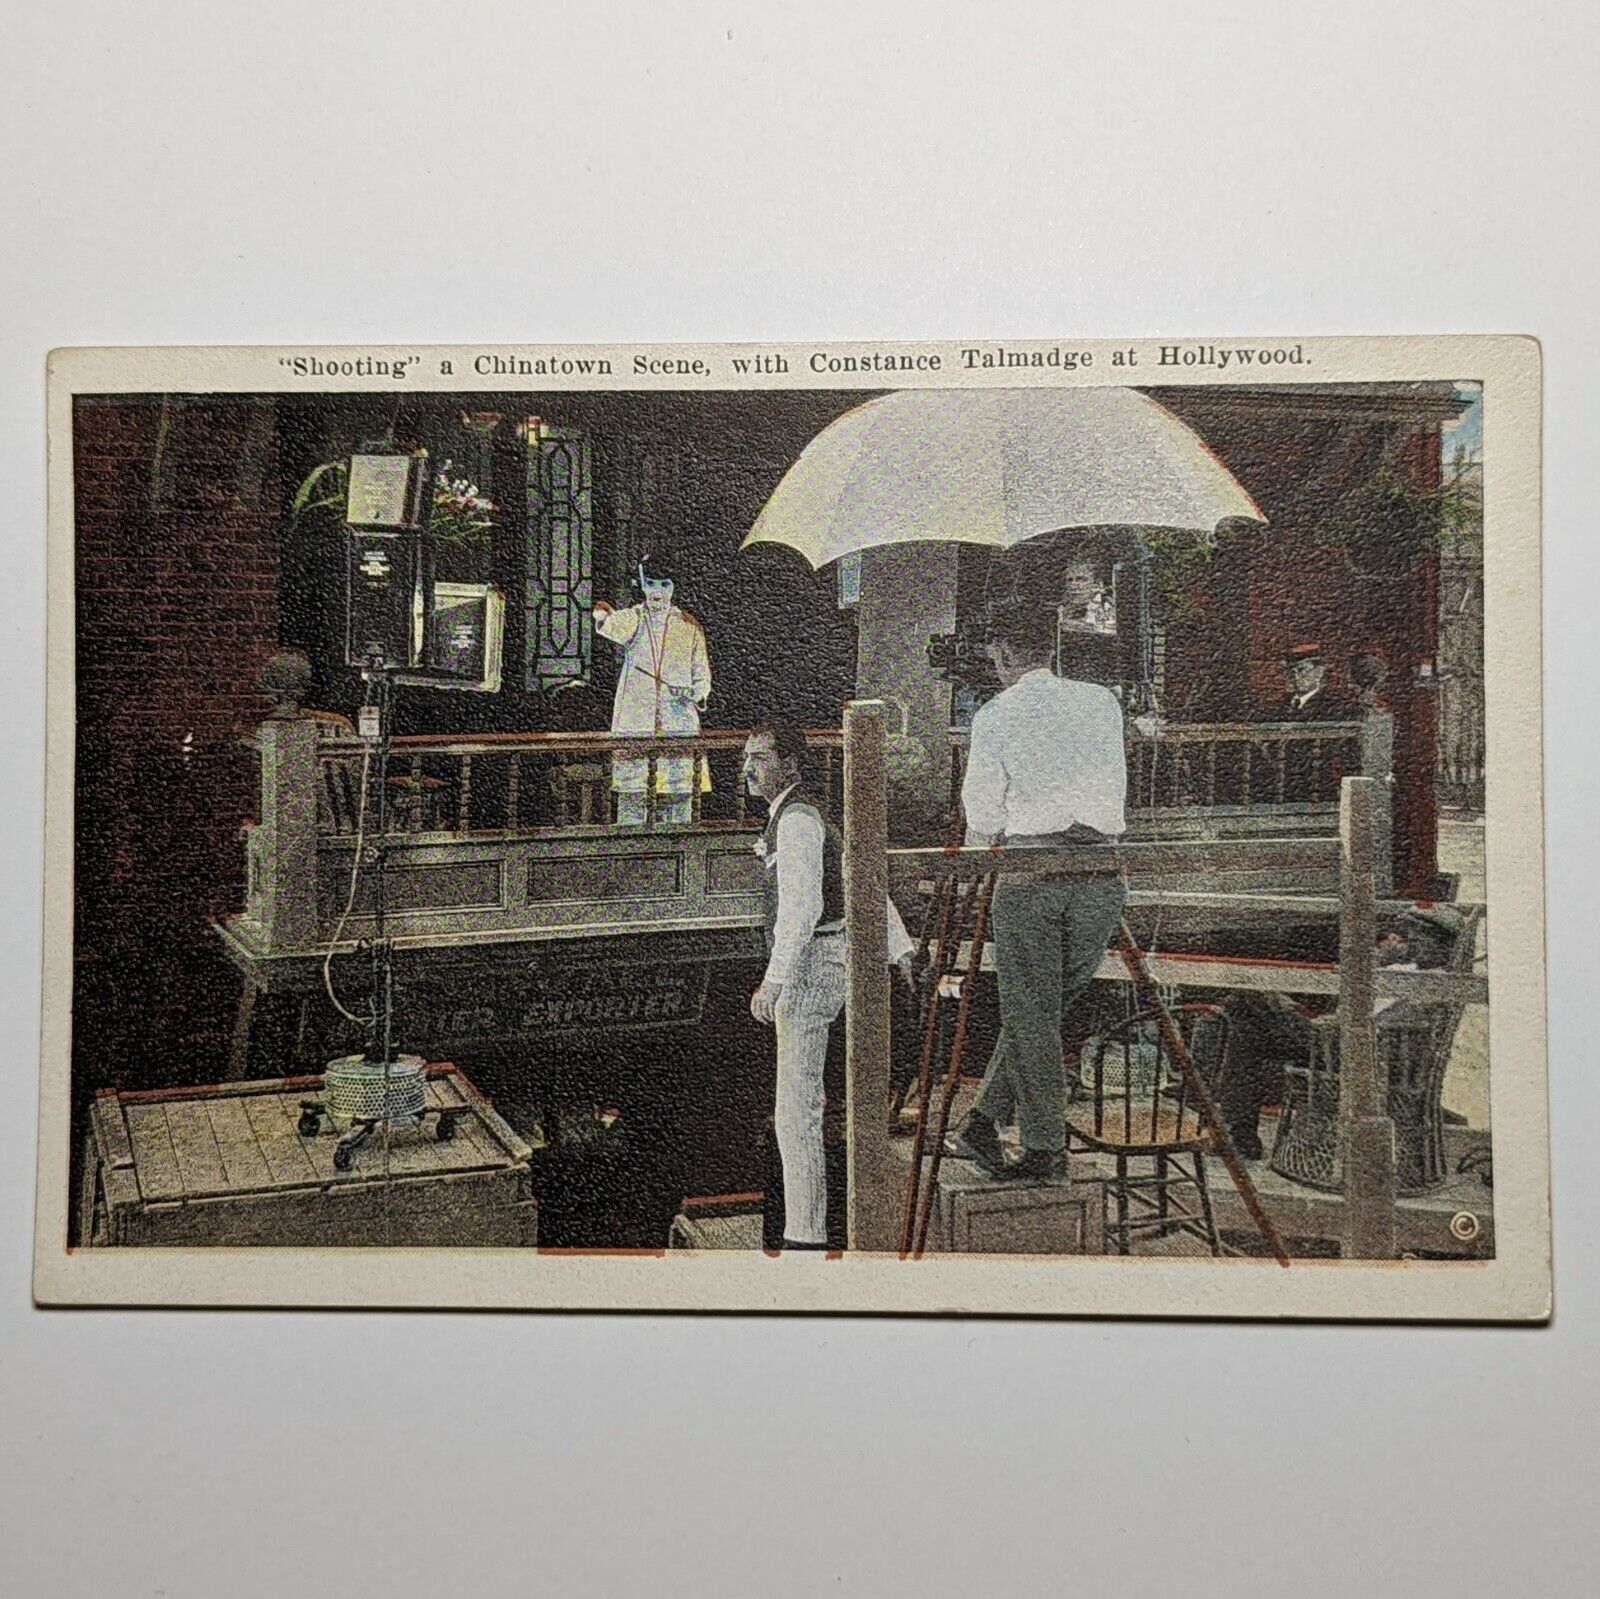 Hollywood CA Shooting a Chinatown Scene with Constance Talmadge Postcard